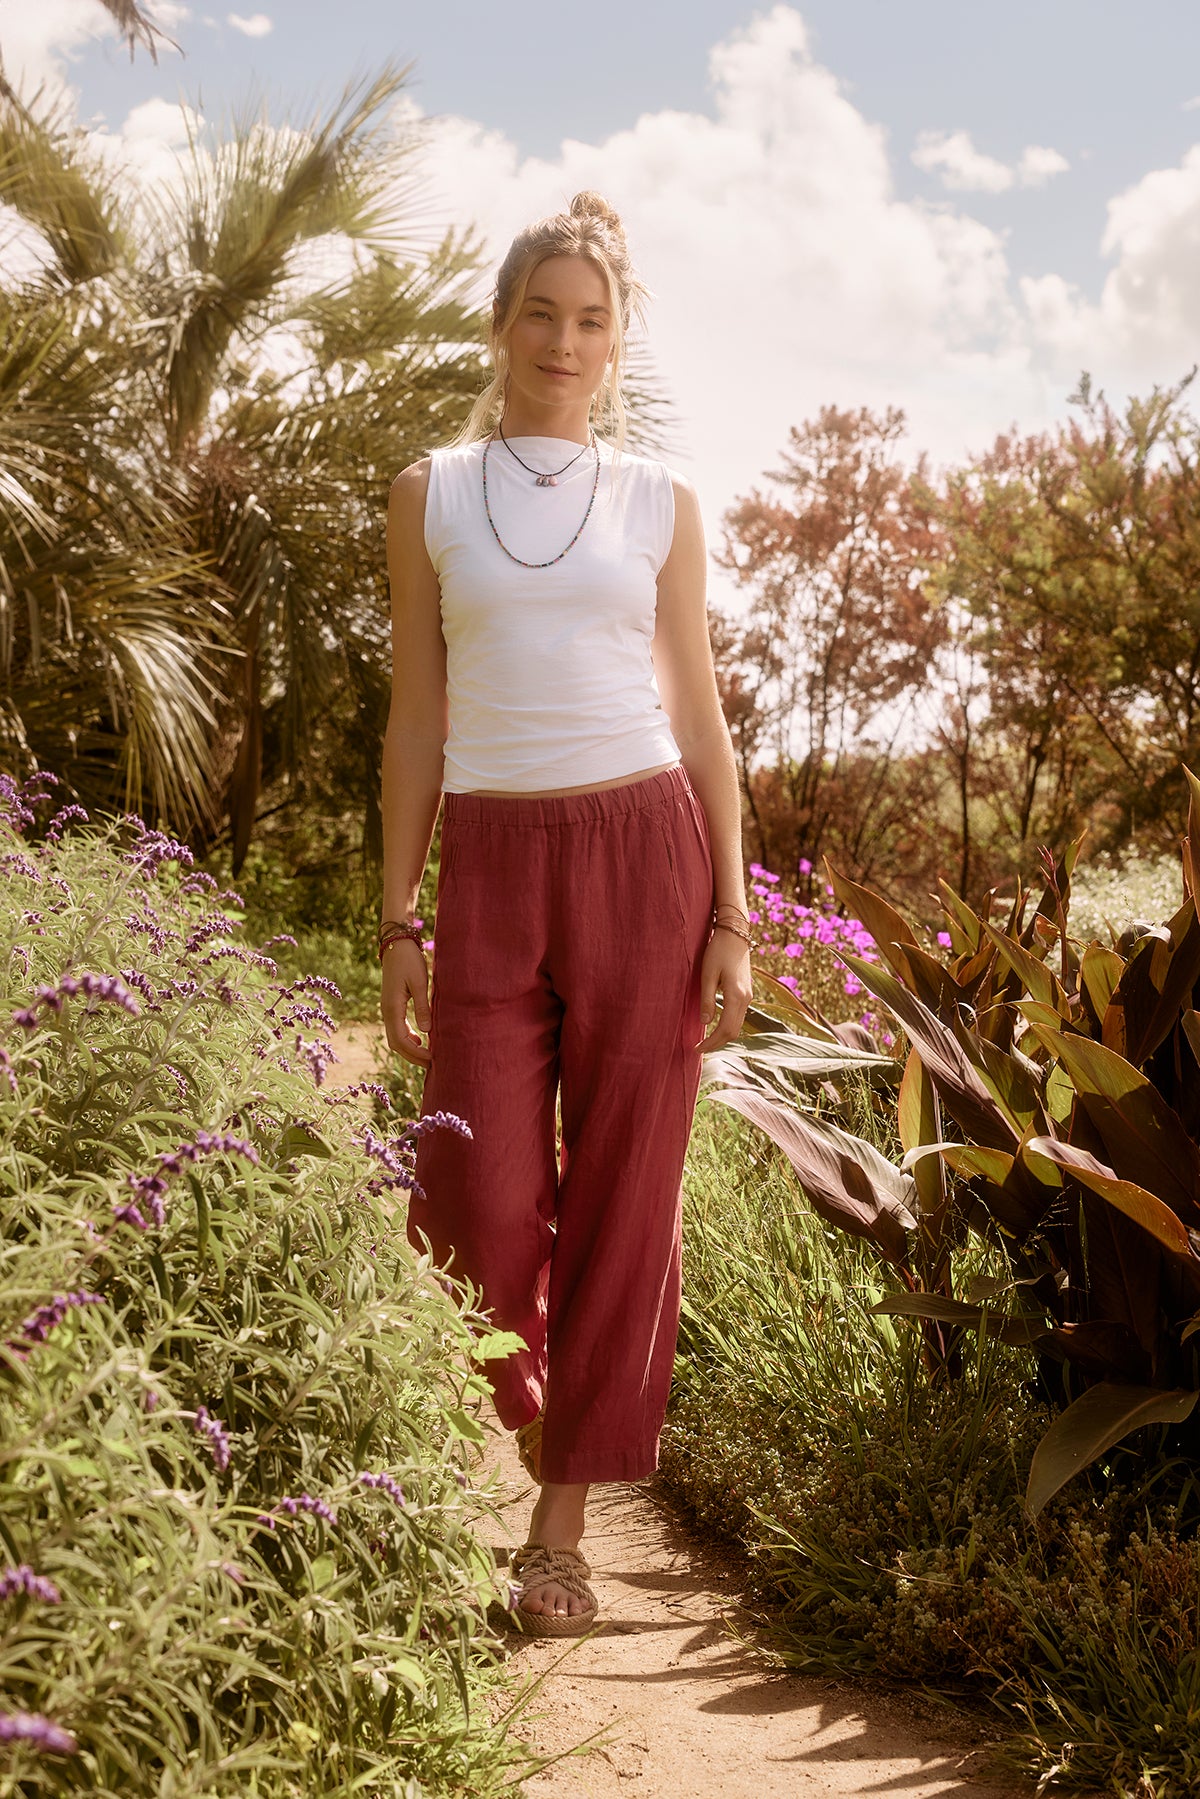 Woman standing on a garden path surrounded by purple flowers, wearing Velvet by Graham & Spencer's LOLA LINEN PANT and a white tank top, with sunlight filtering through trees.-36909780271297